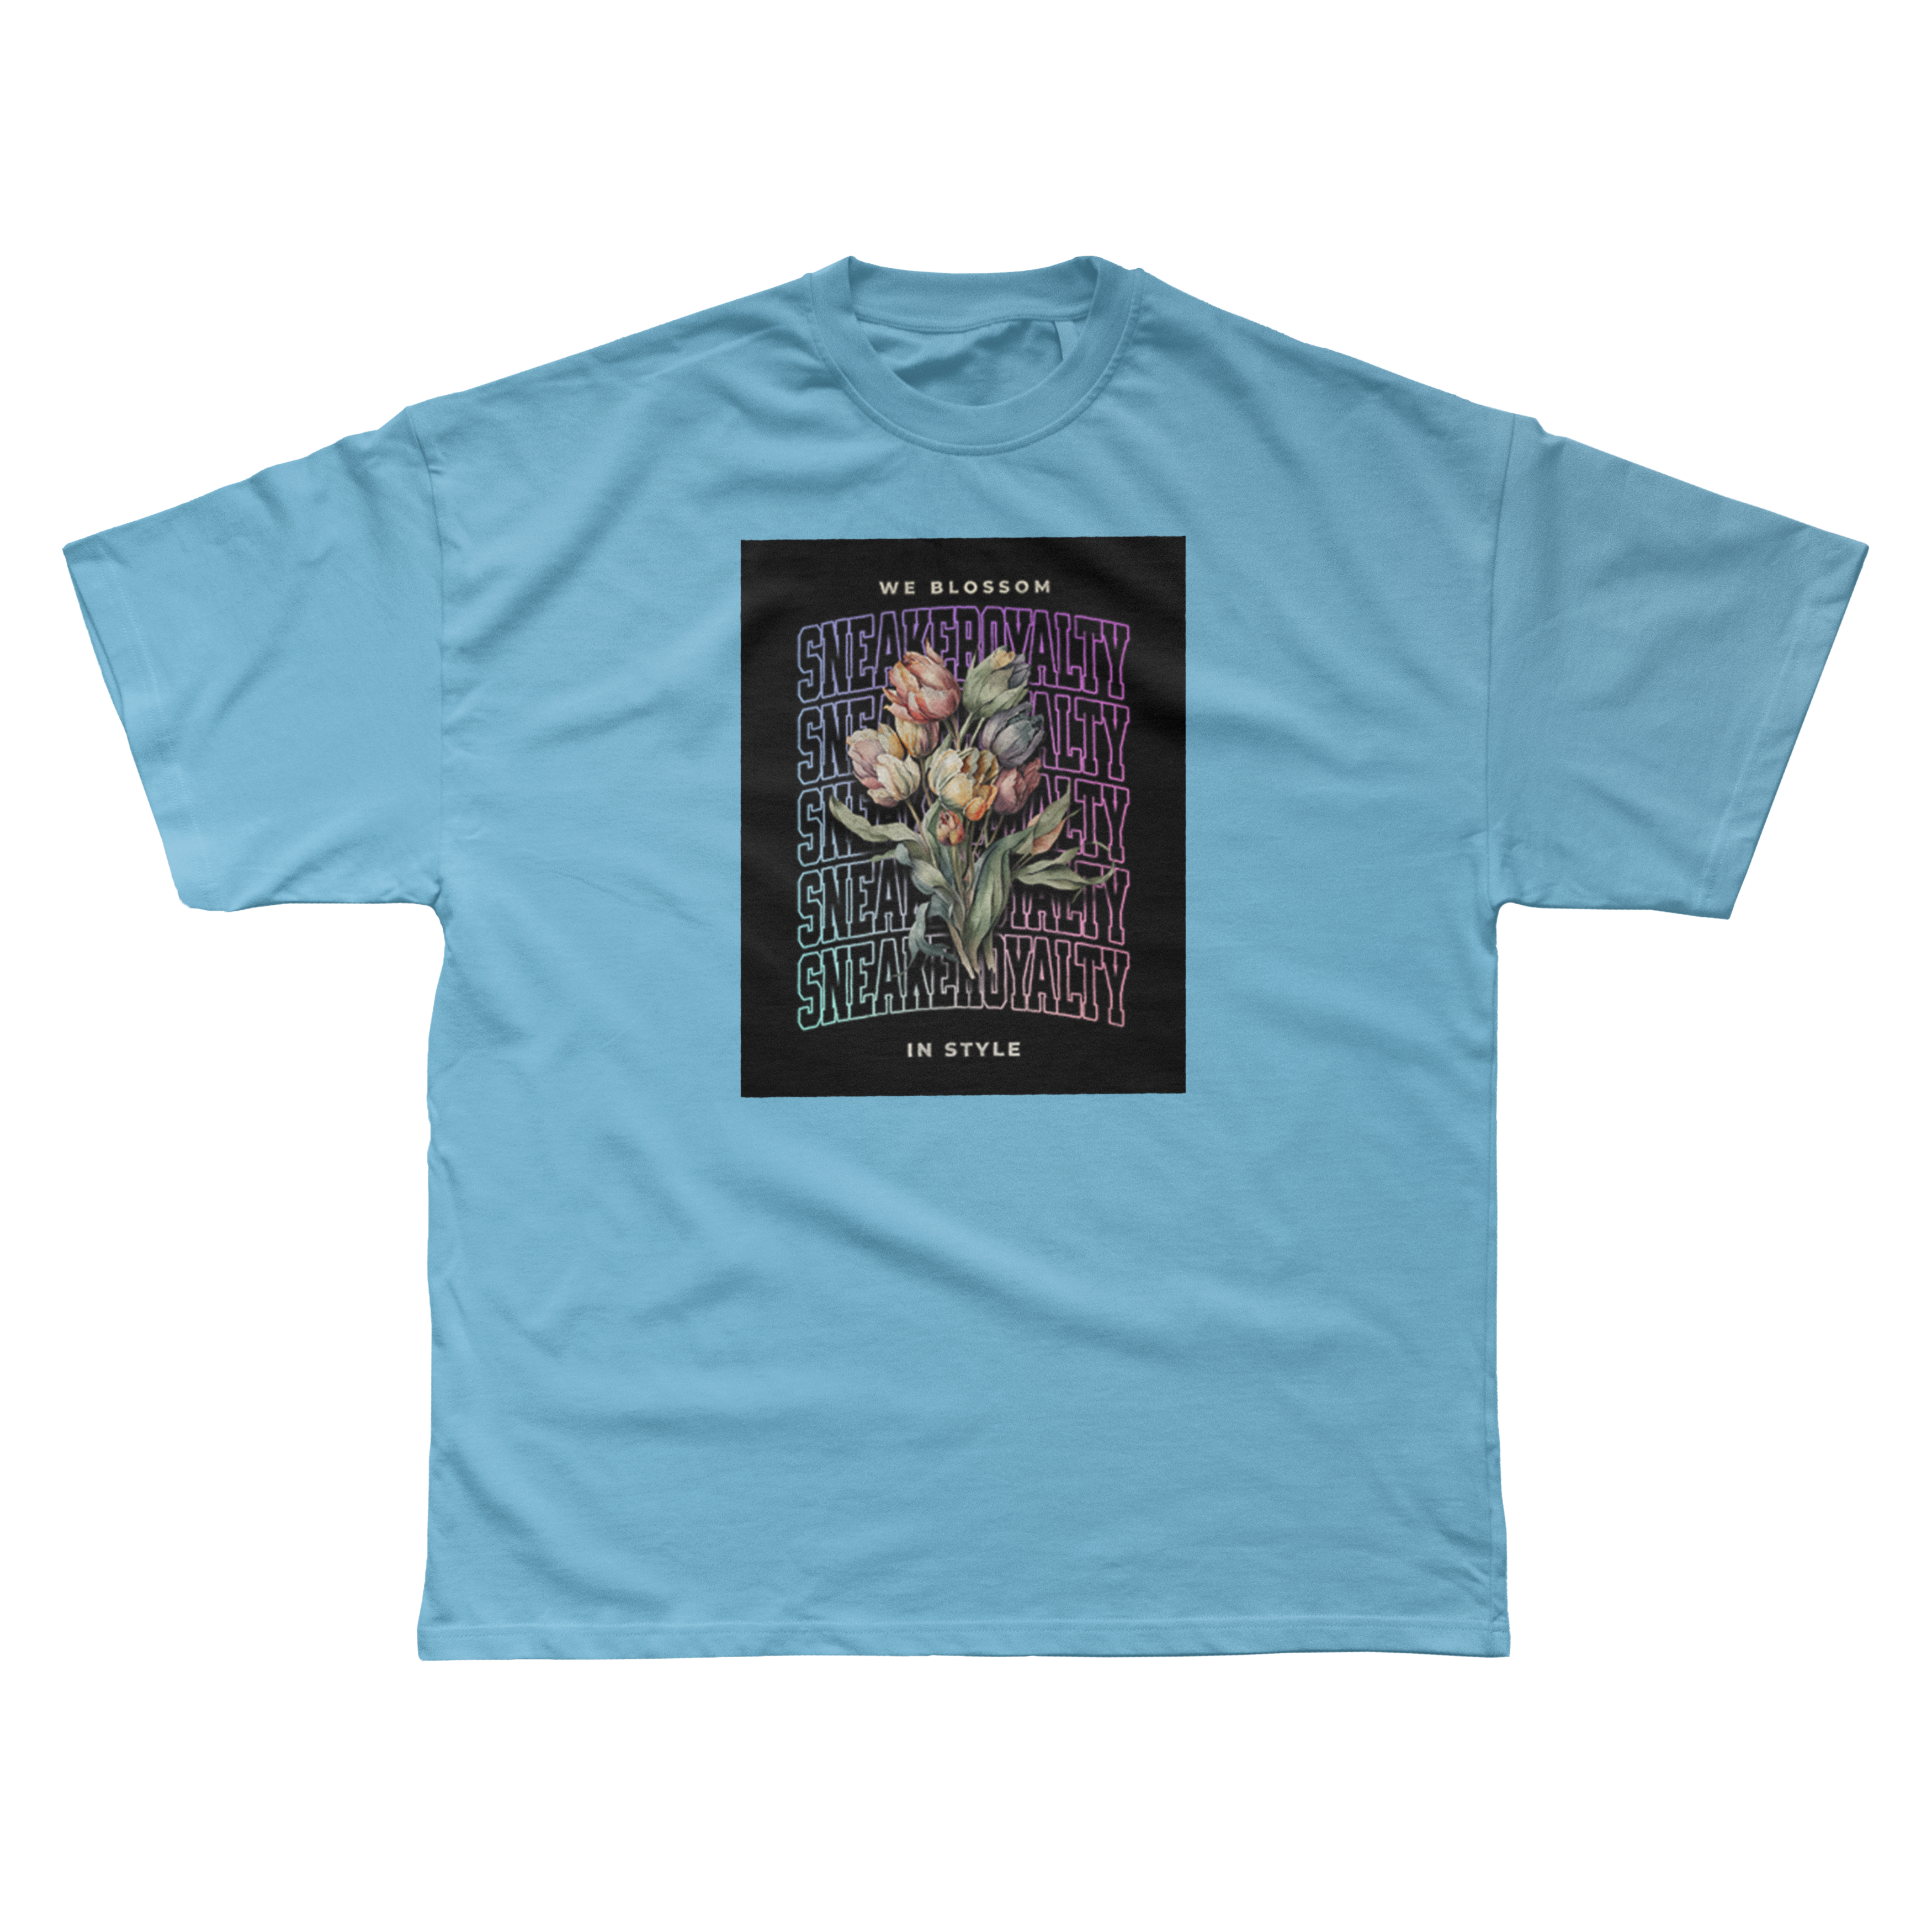 We Blossom In Style Tee-Light Blue